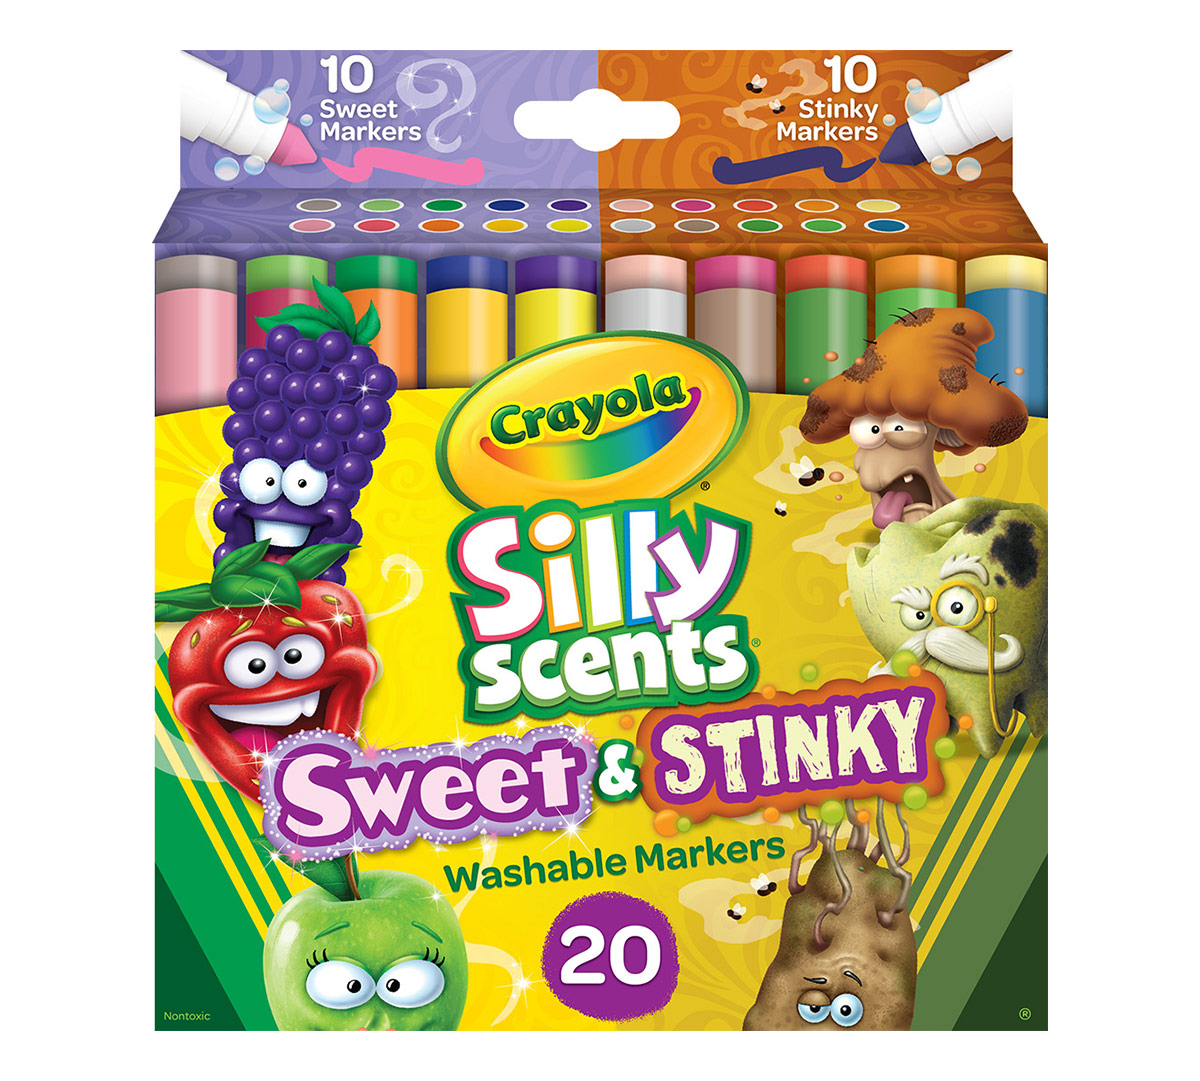 Silly Scents Sweet & Stinky Scented Markers | Crayola.com | Crayola